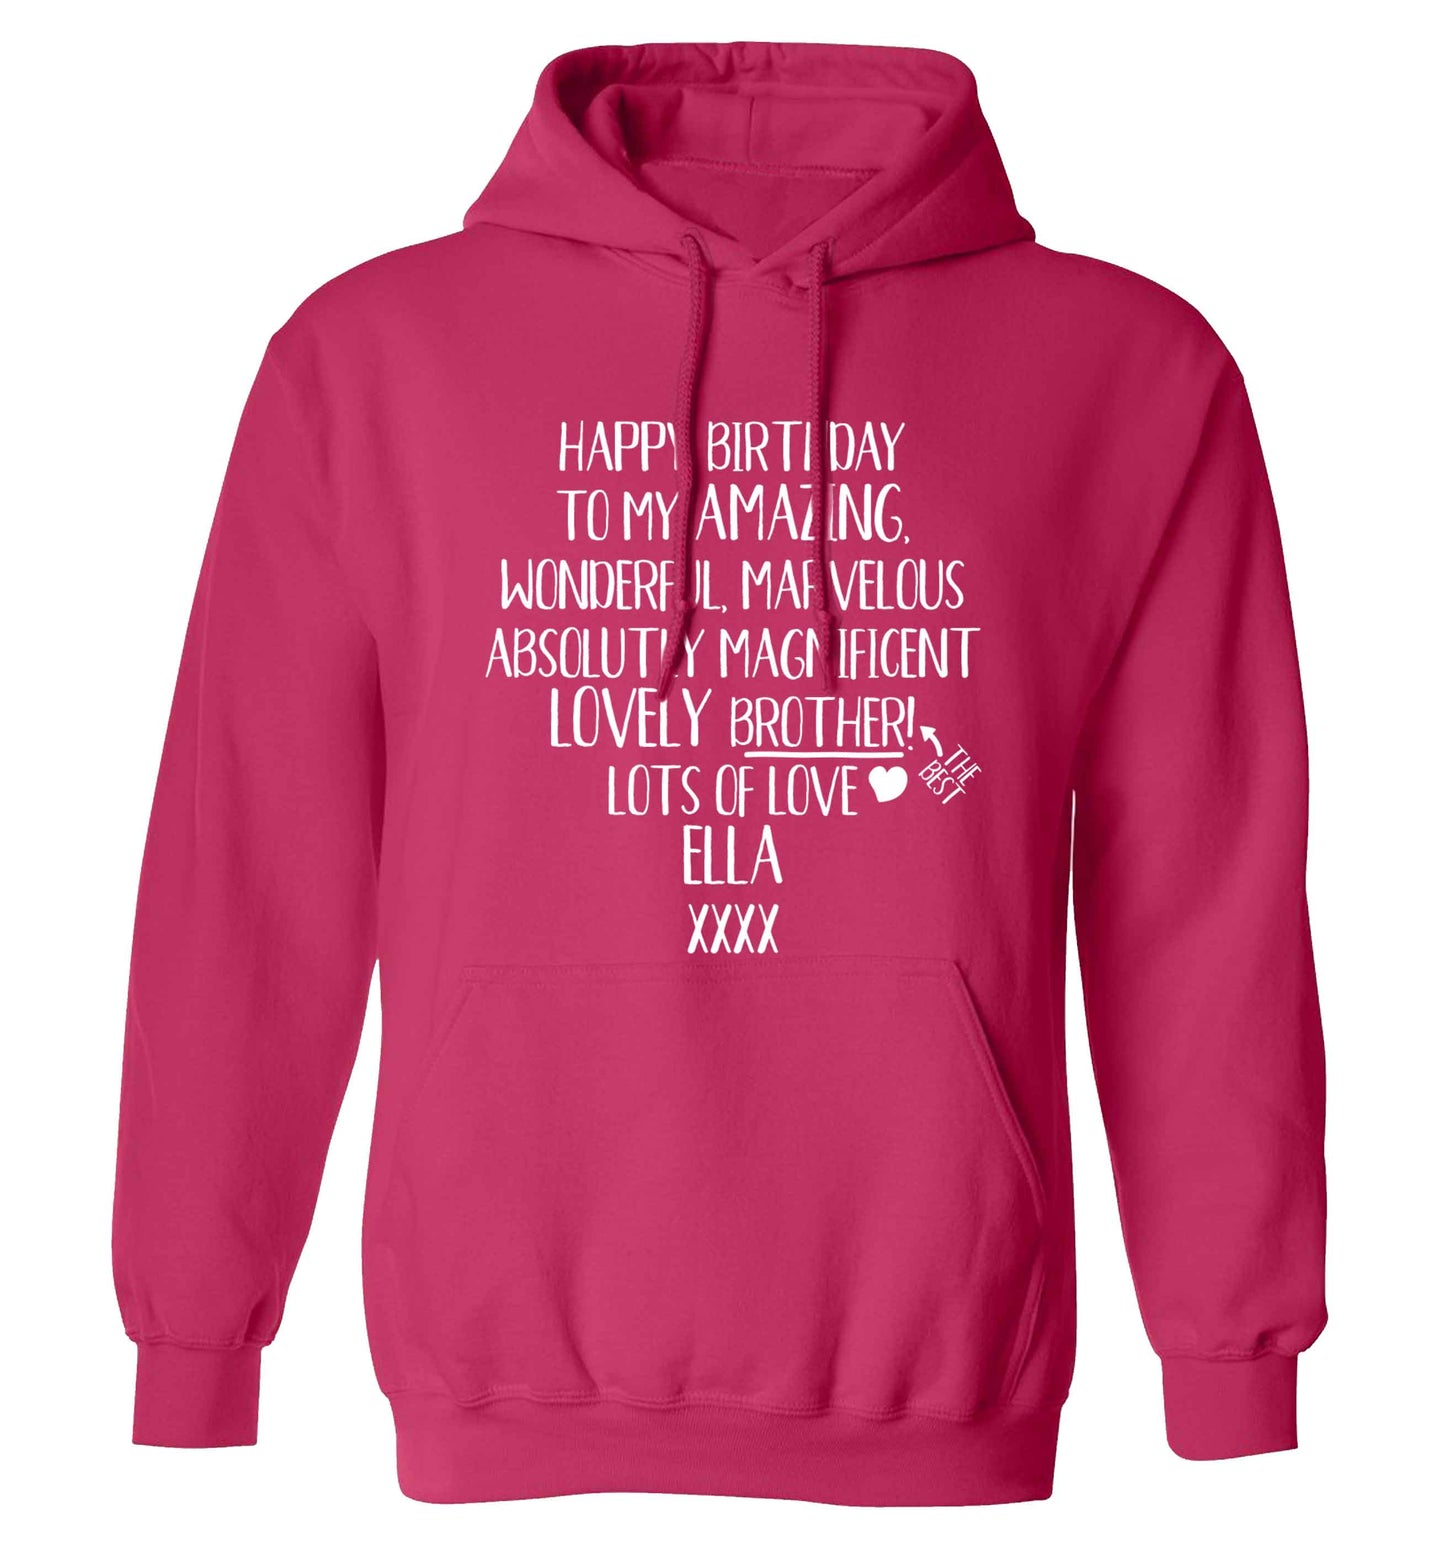 Personalised happy birthday to my amazing, wonderful, lovely brother adults unisex pink hoodie 2XL